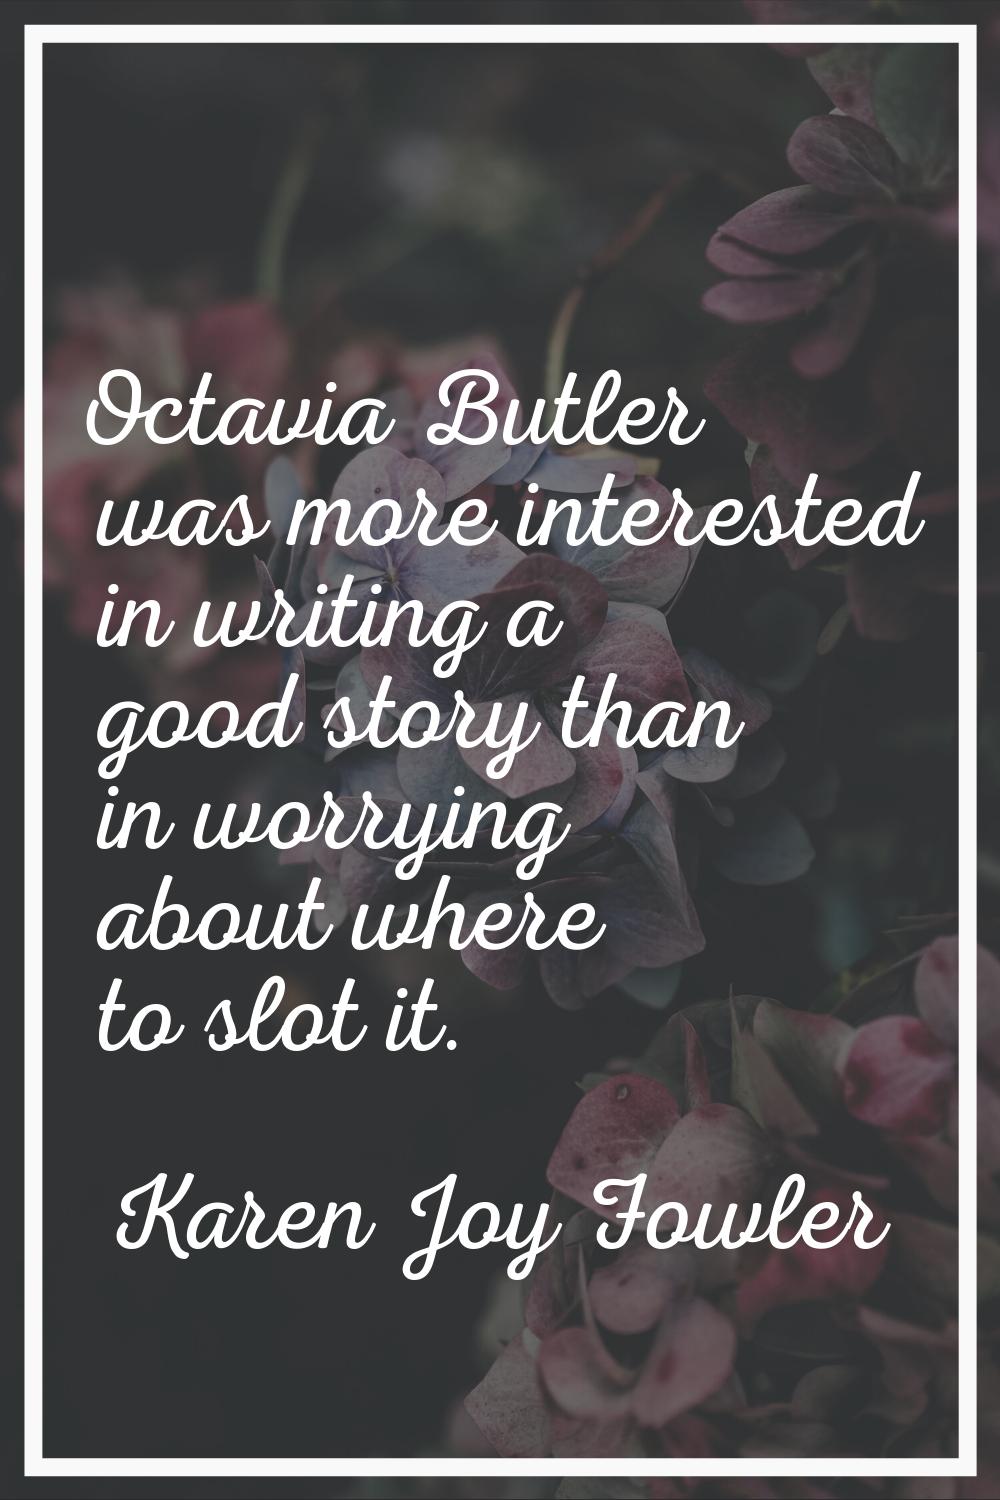 Octavia Butler was more interested in writing a good story than in worrying about where to slot it.